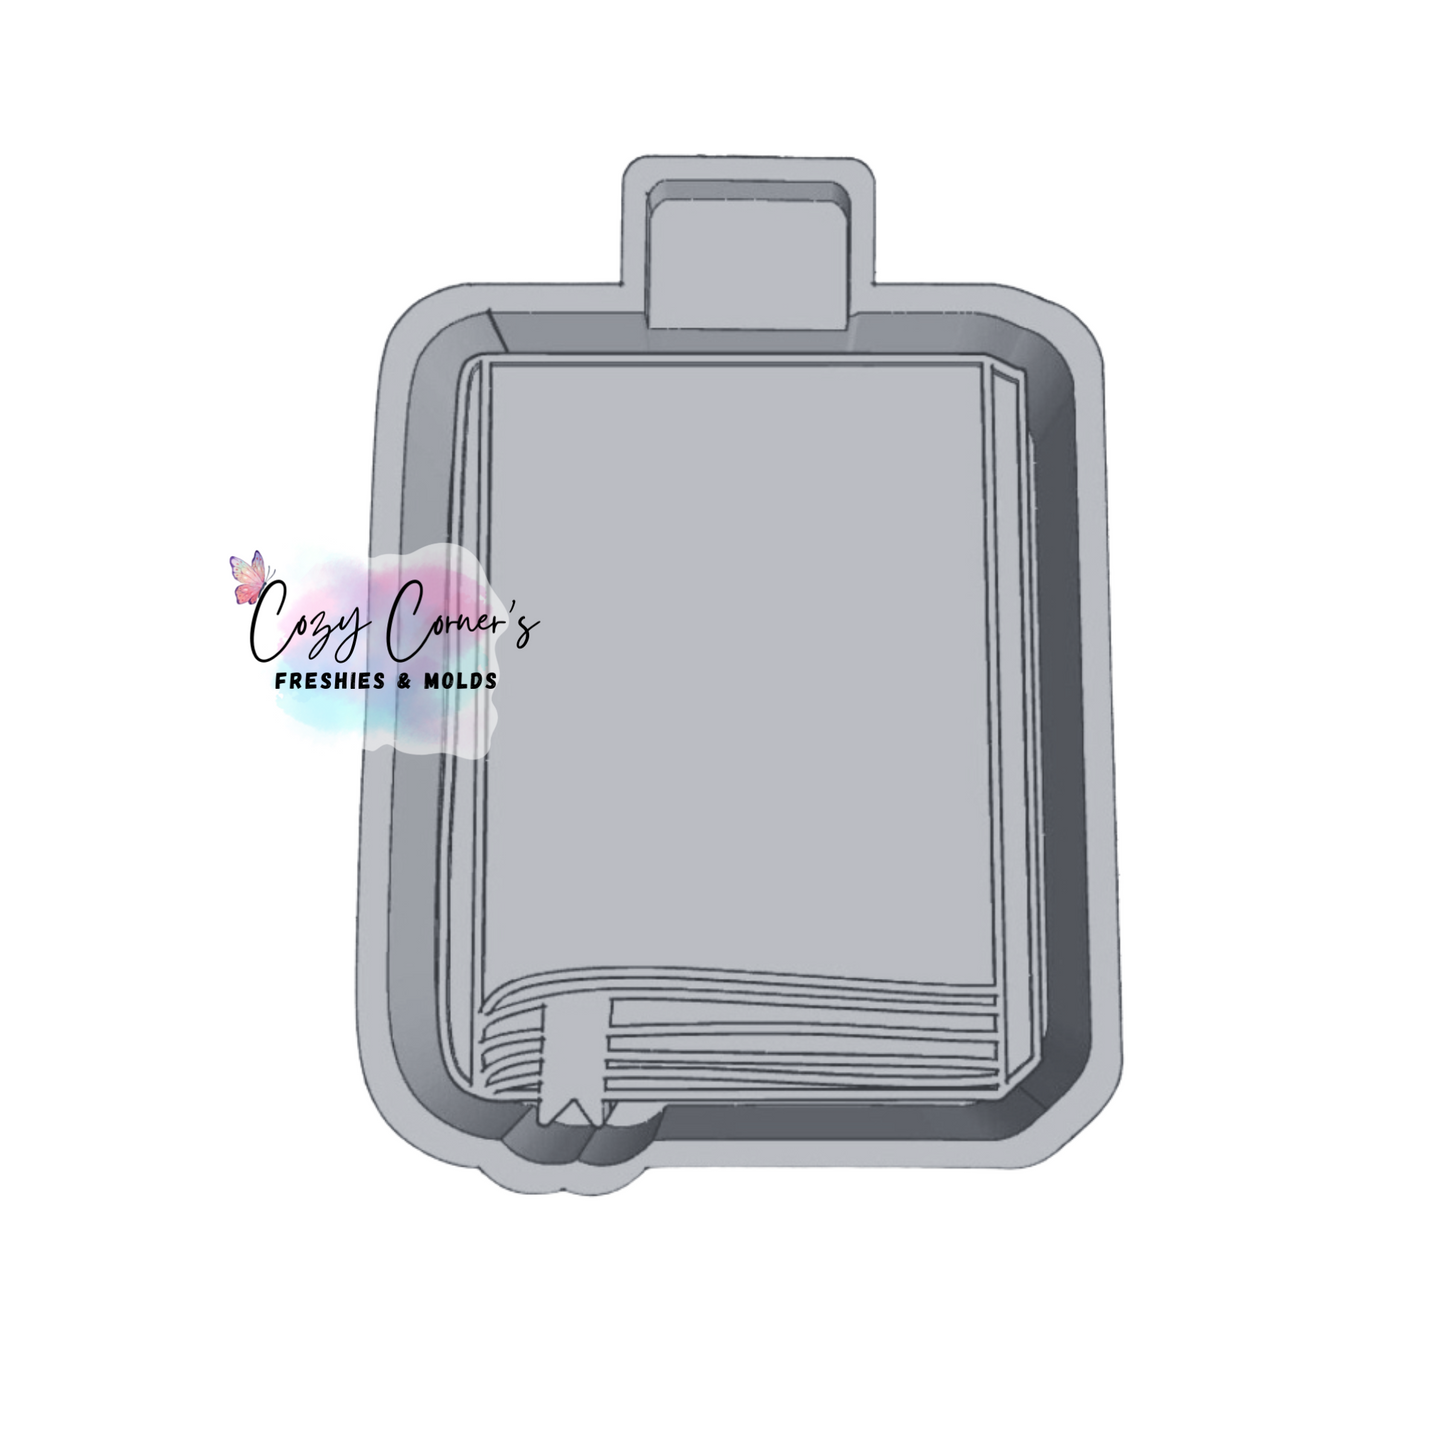 Book Cardstock Mold